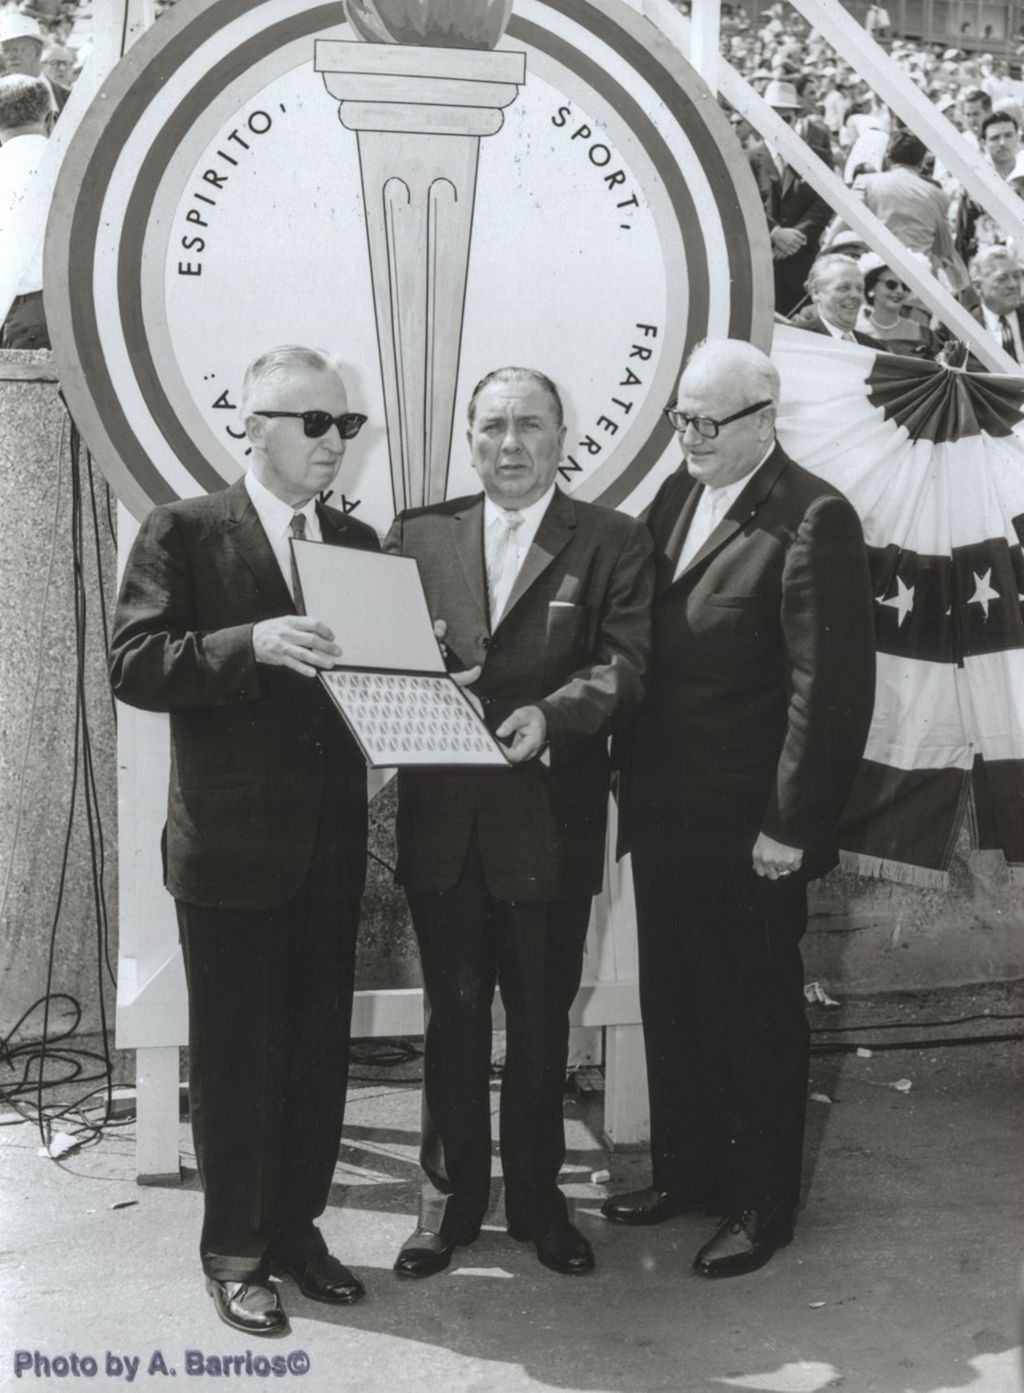 Miniature of Richard J. Daley and others at the Pan American Games